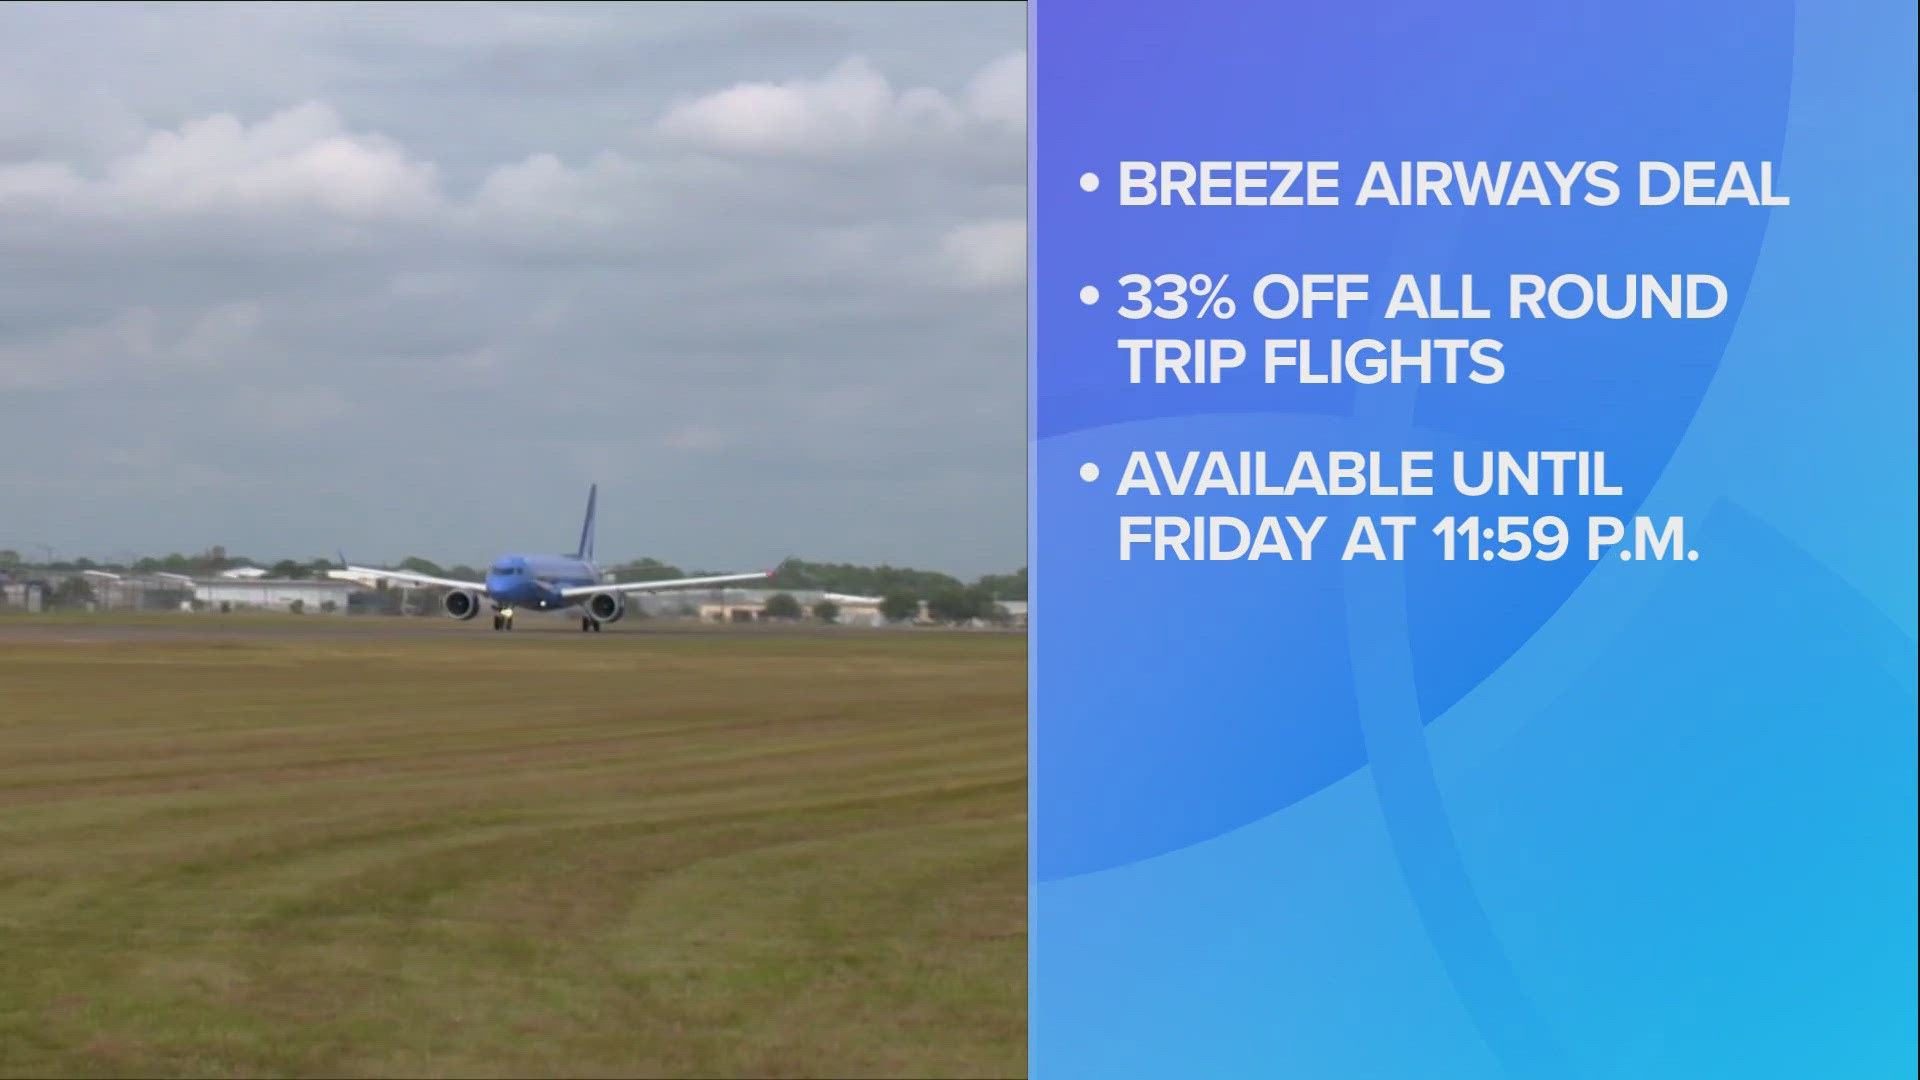 Breeze Airways starts nonstop service from the Akron-Canton Airport to Los Angeles International Airport.